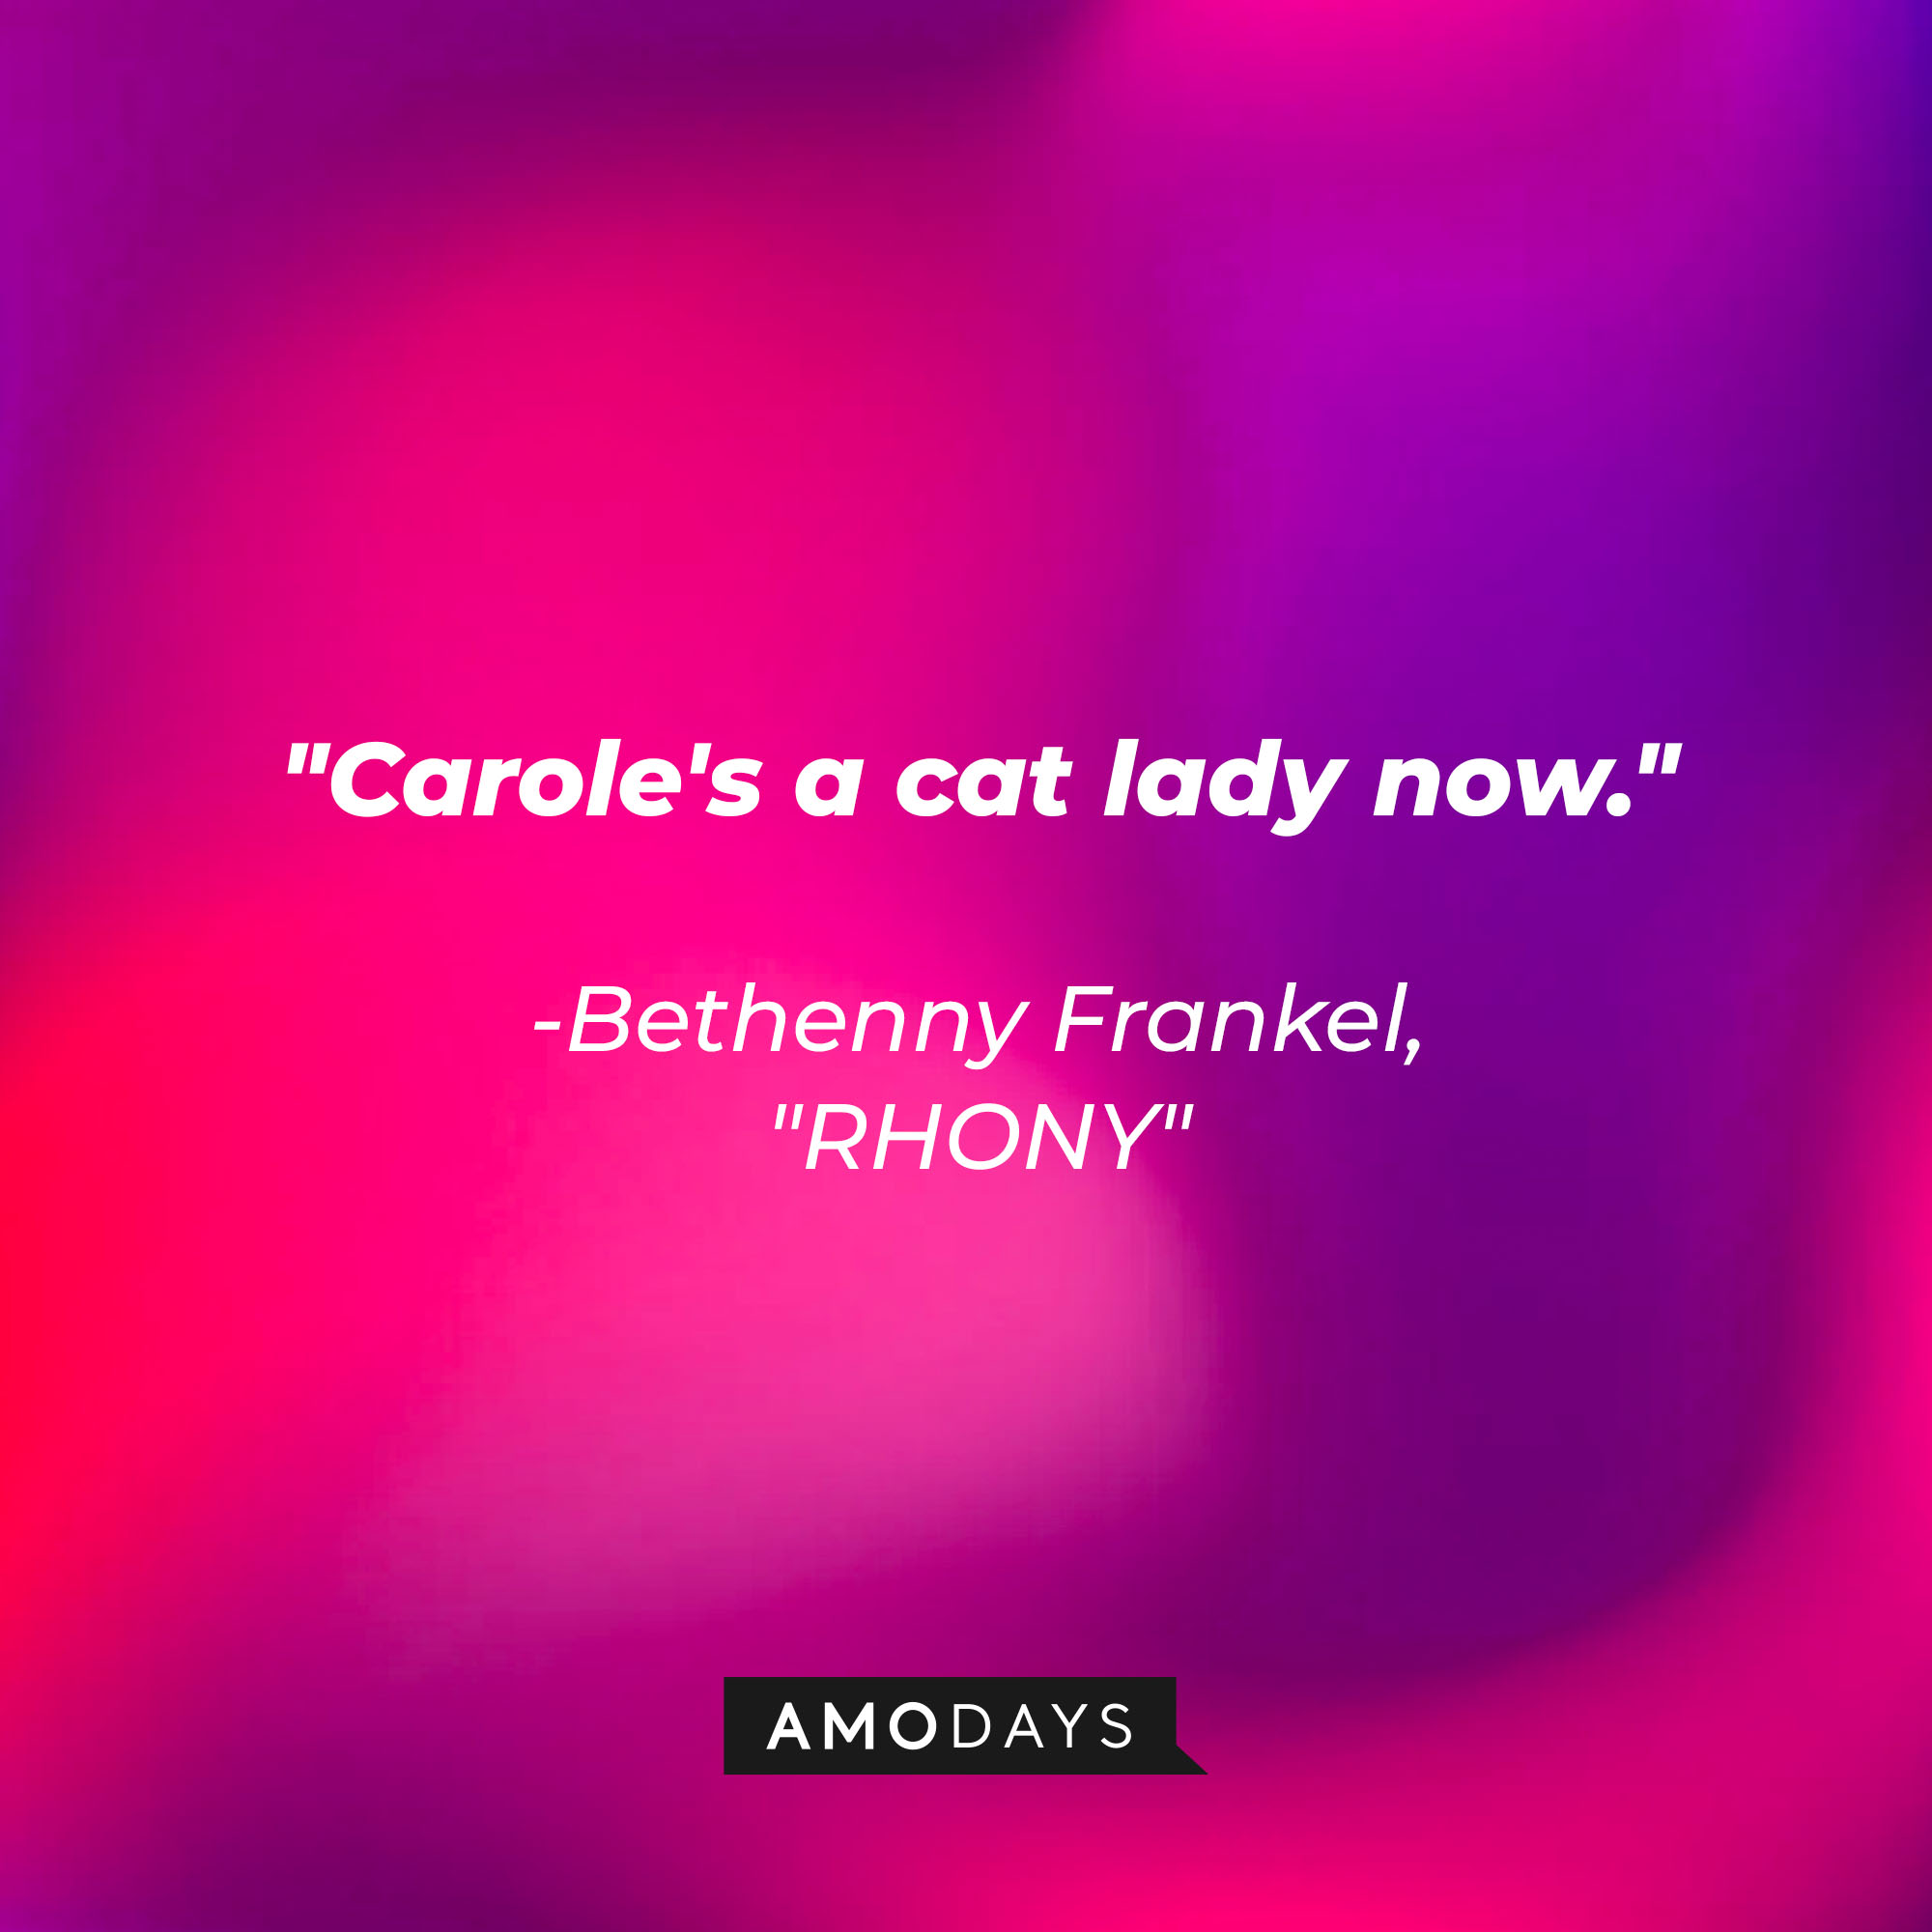 Bethenny Frankel's quote: "Carole's a cat lady now" | Source: Amodays